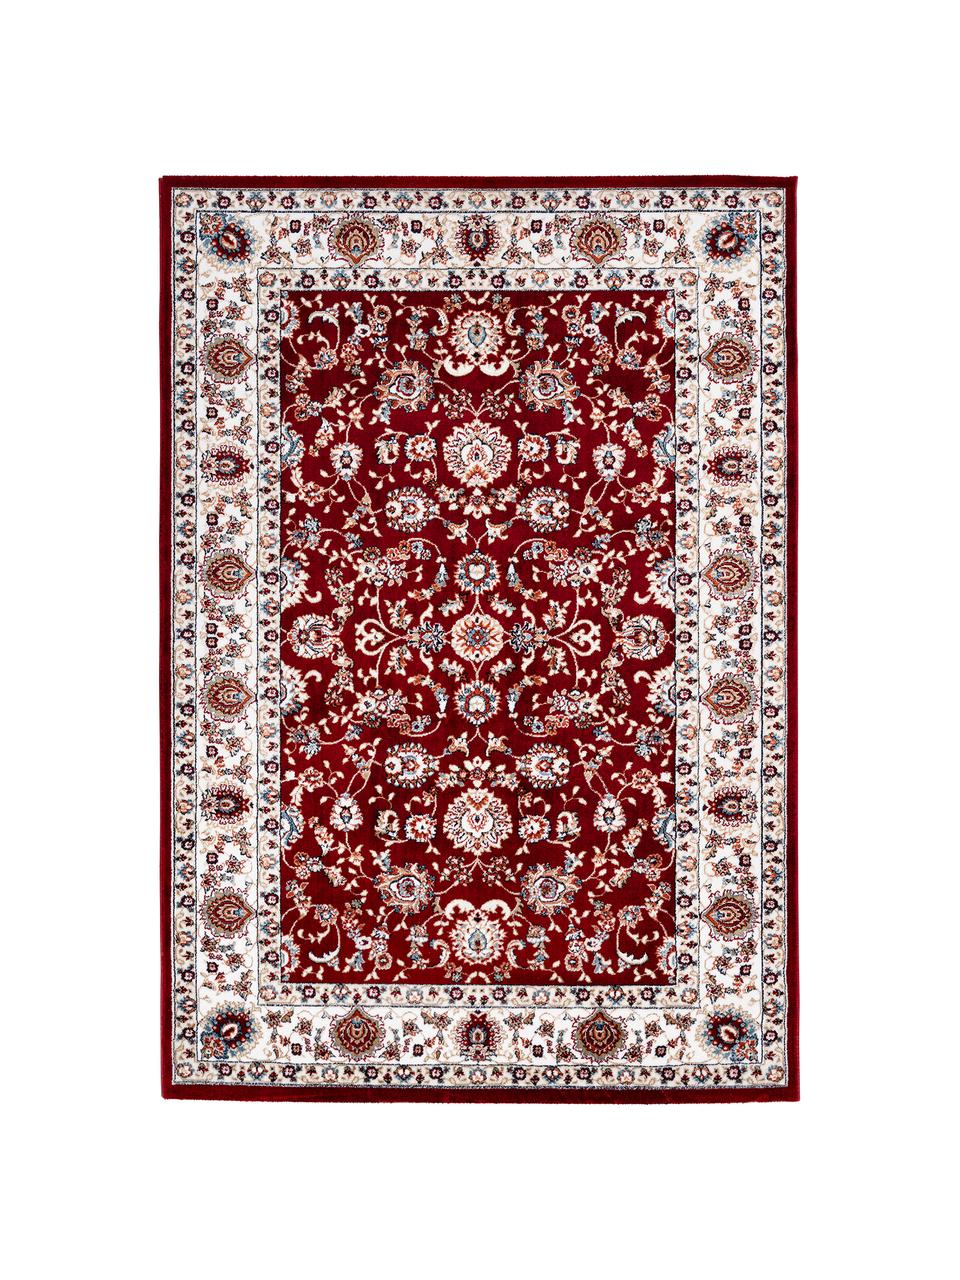 Gemusterter Teppich Isfahan in Rot im Orient Style, 100% Polyester, Rot, Mehrfarbig, B 80 x L 150 cm (Größe XS)